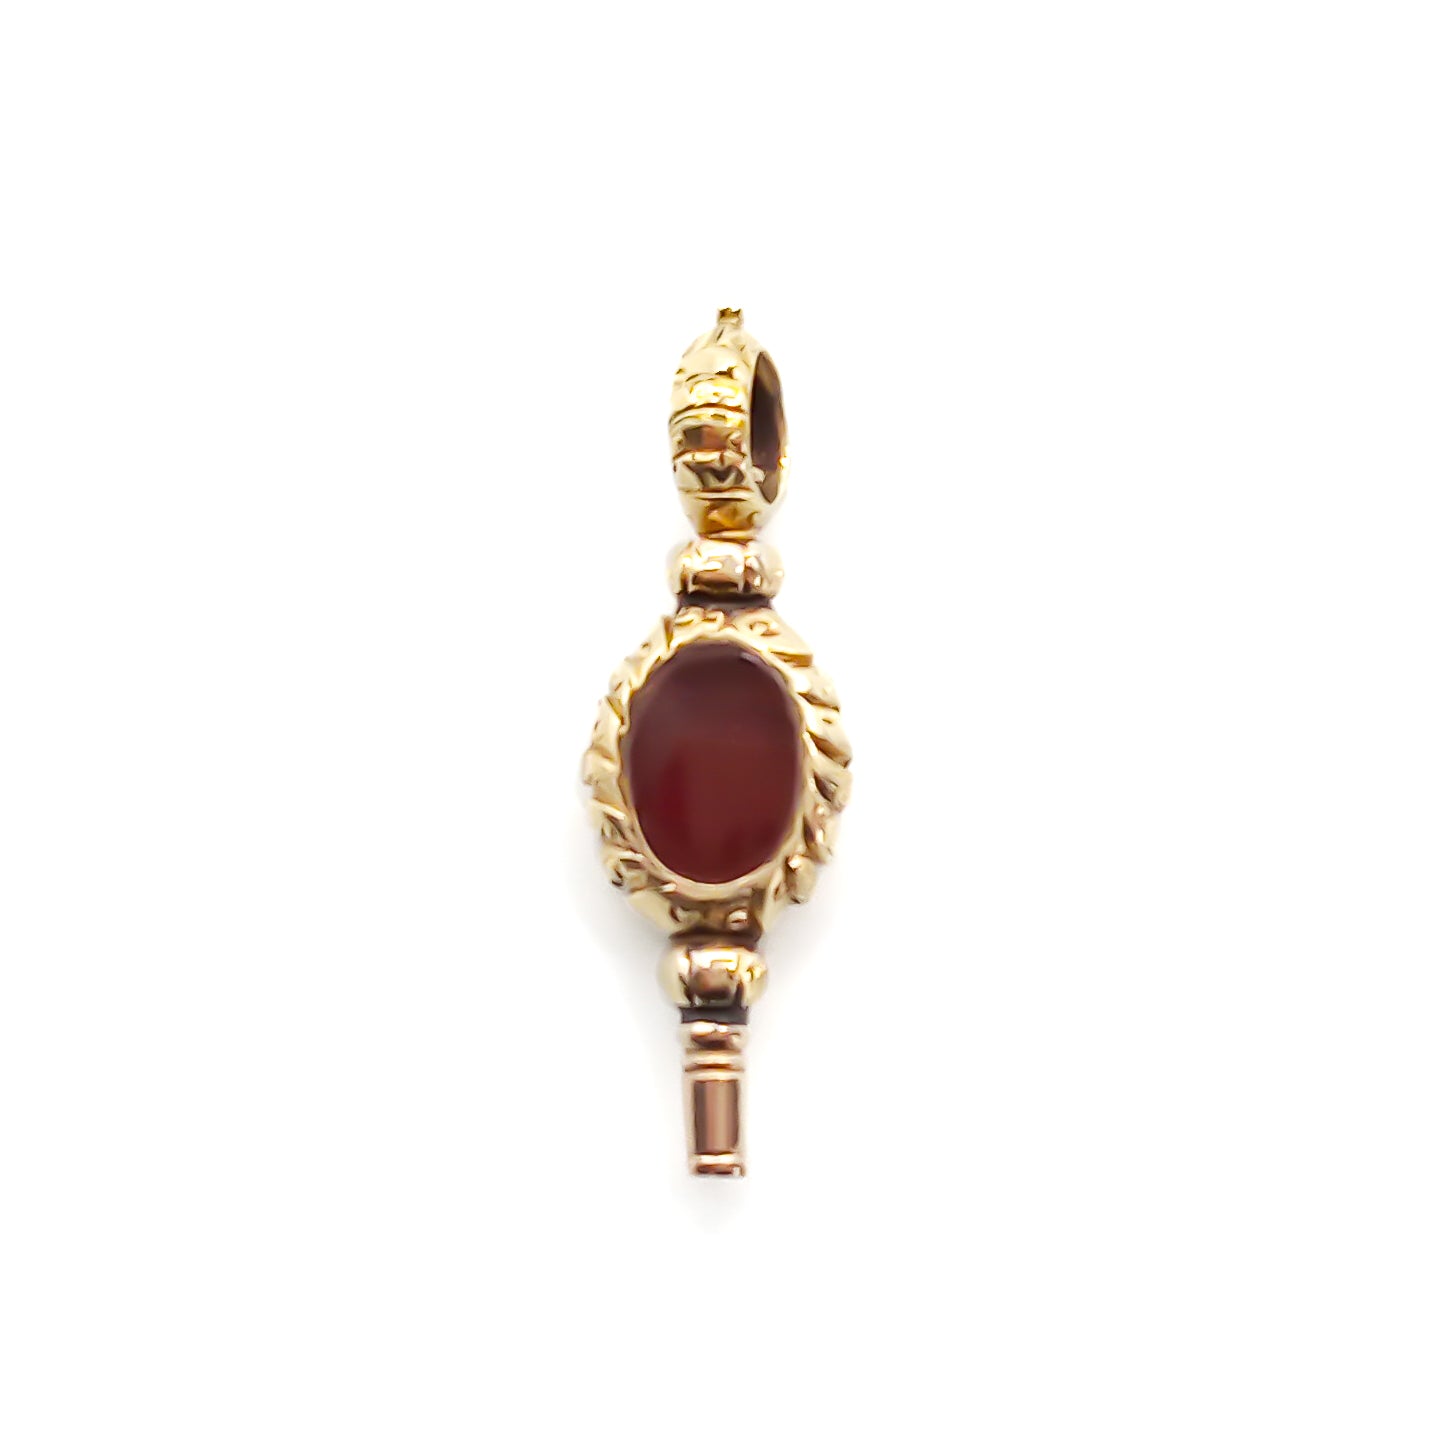 Beautifully engraved small 9ct gold Victorian watch key set with a bloodstone on one side and carnelian on the other.